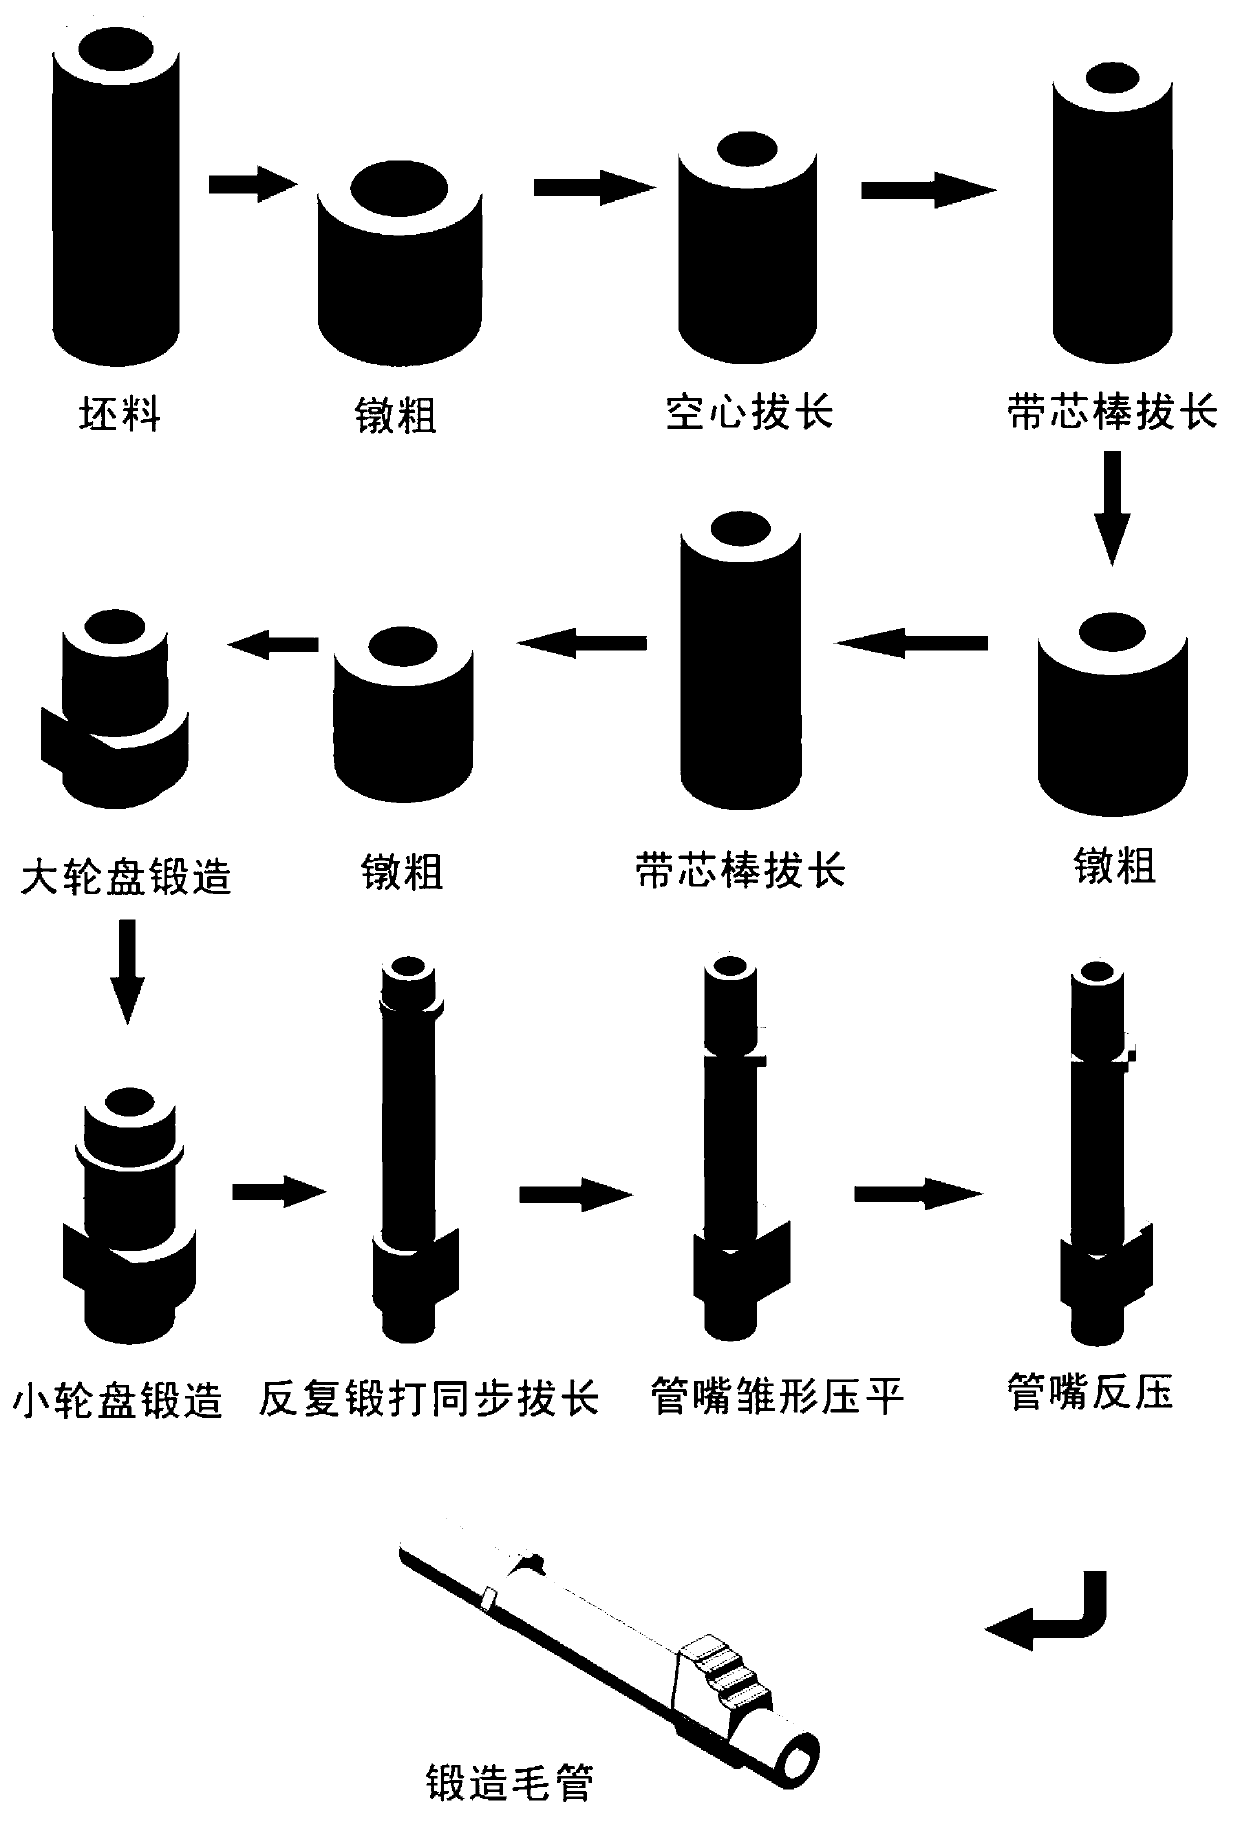 Process of producing nuclear power plant main pipeline forge piece through centrifugal casting hollow ingot